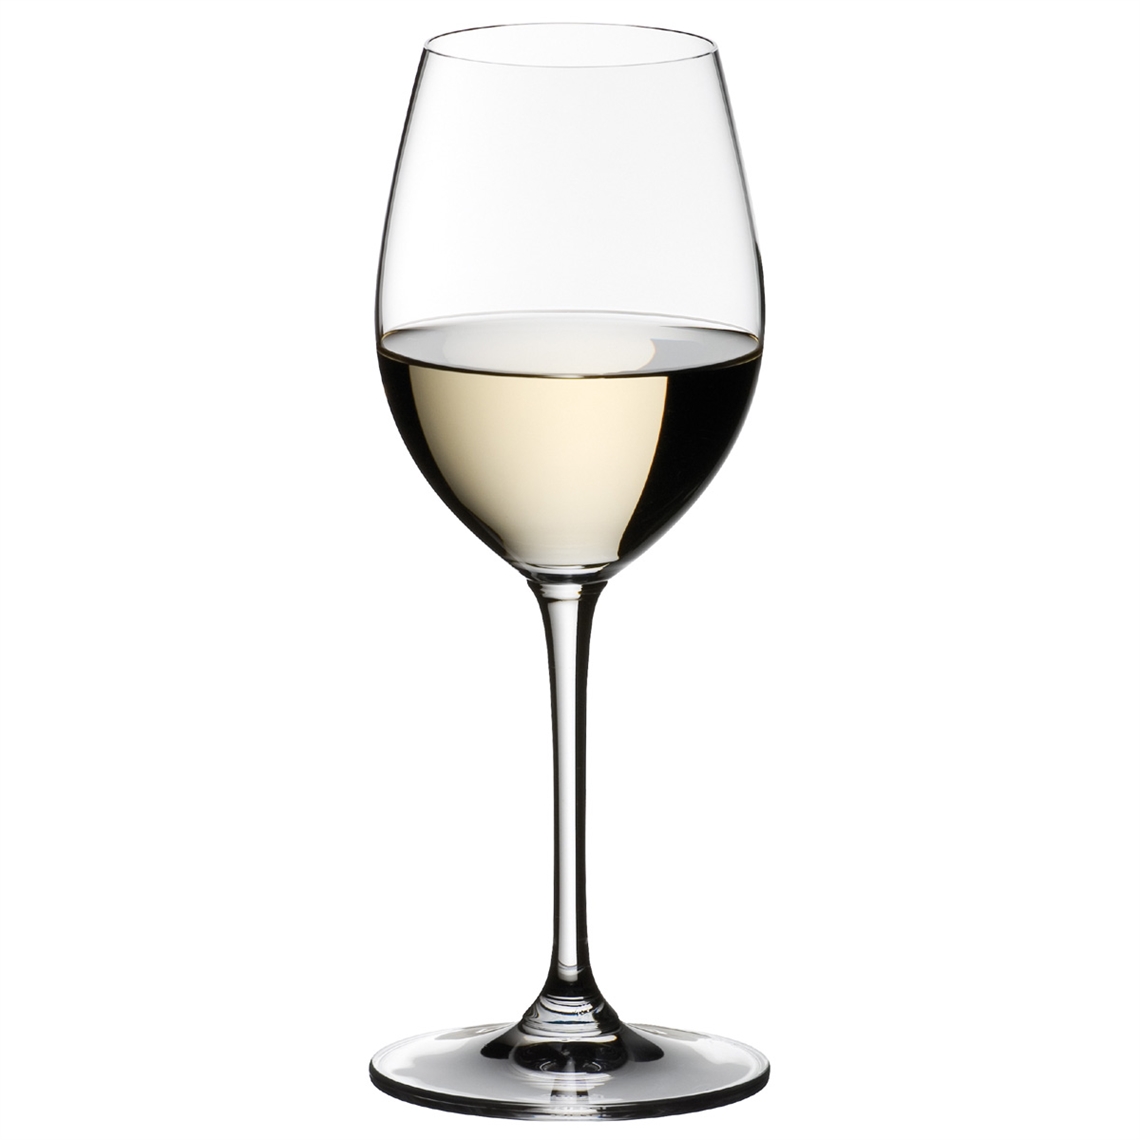 View more water glasses / tumblers from our Dessert Wine Glasses range